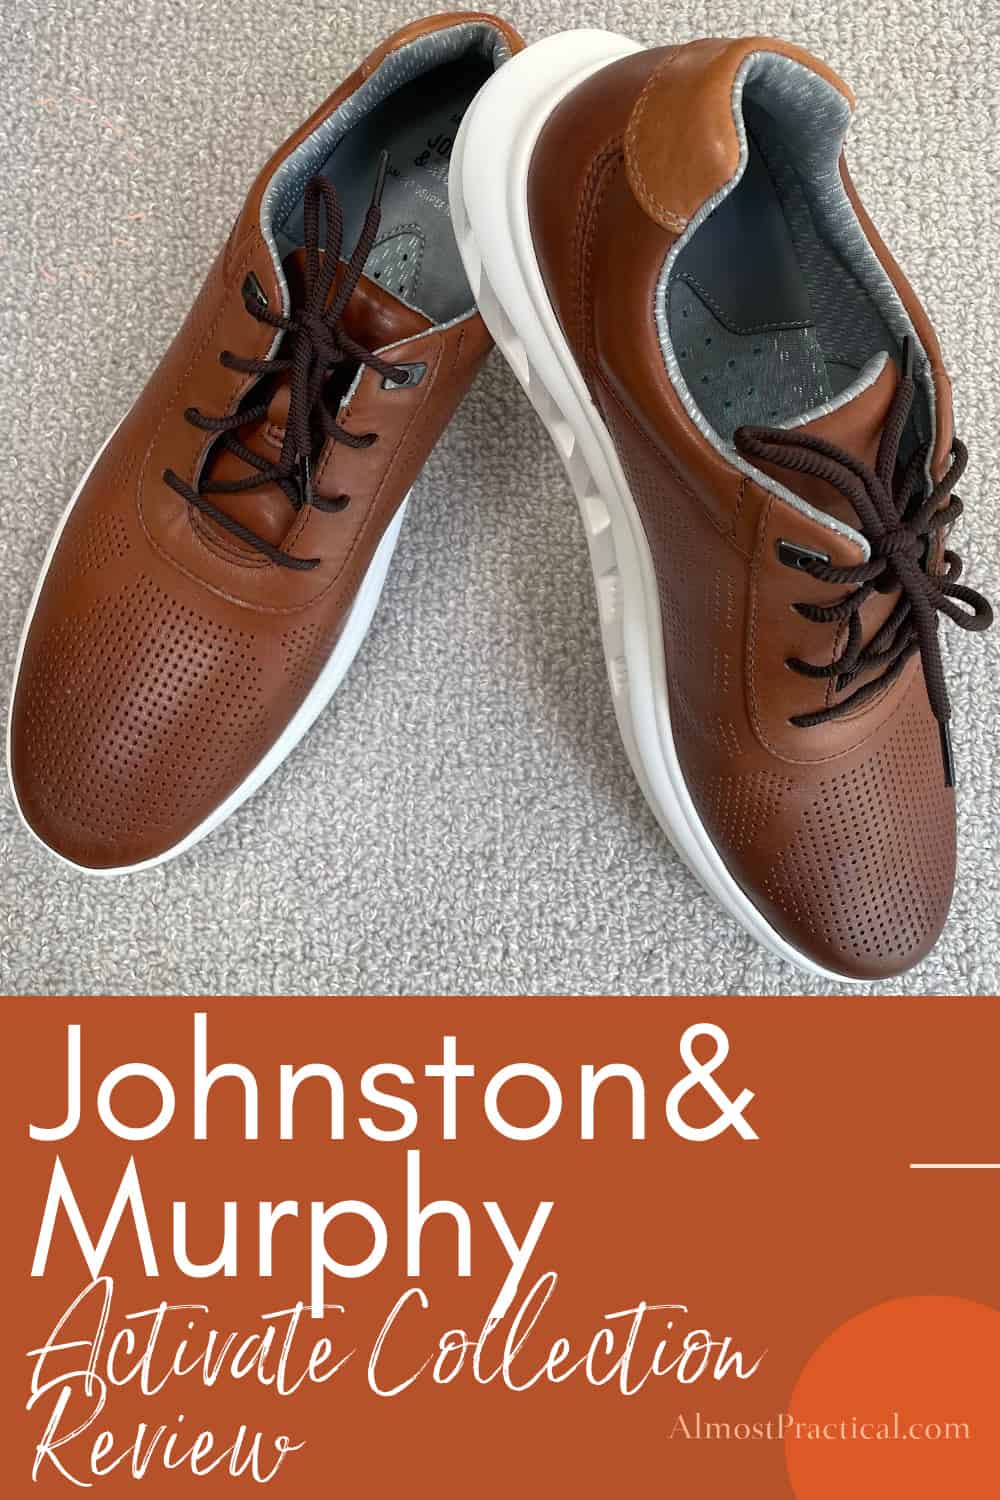 Johnston & Murphy Activate Collection U-Throat Shoes in tan leather